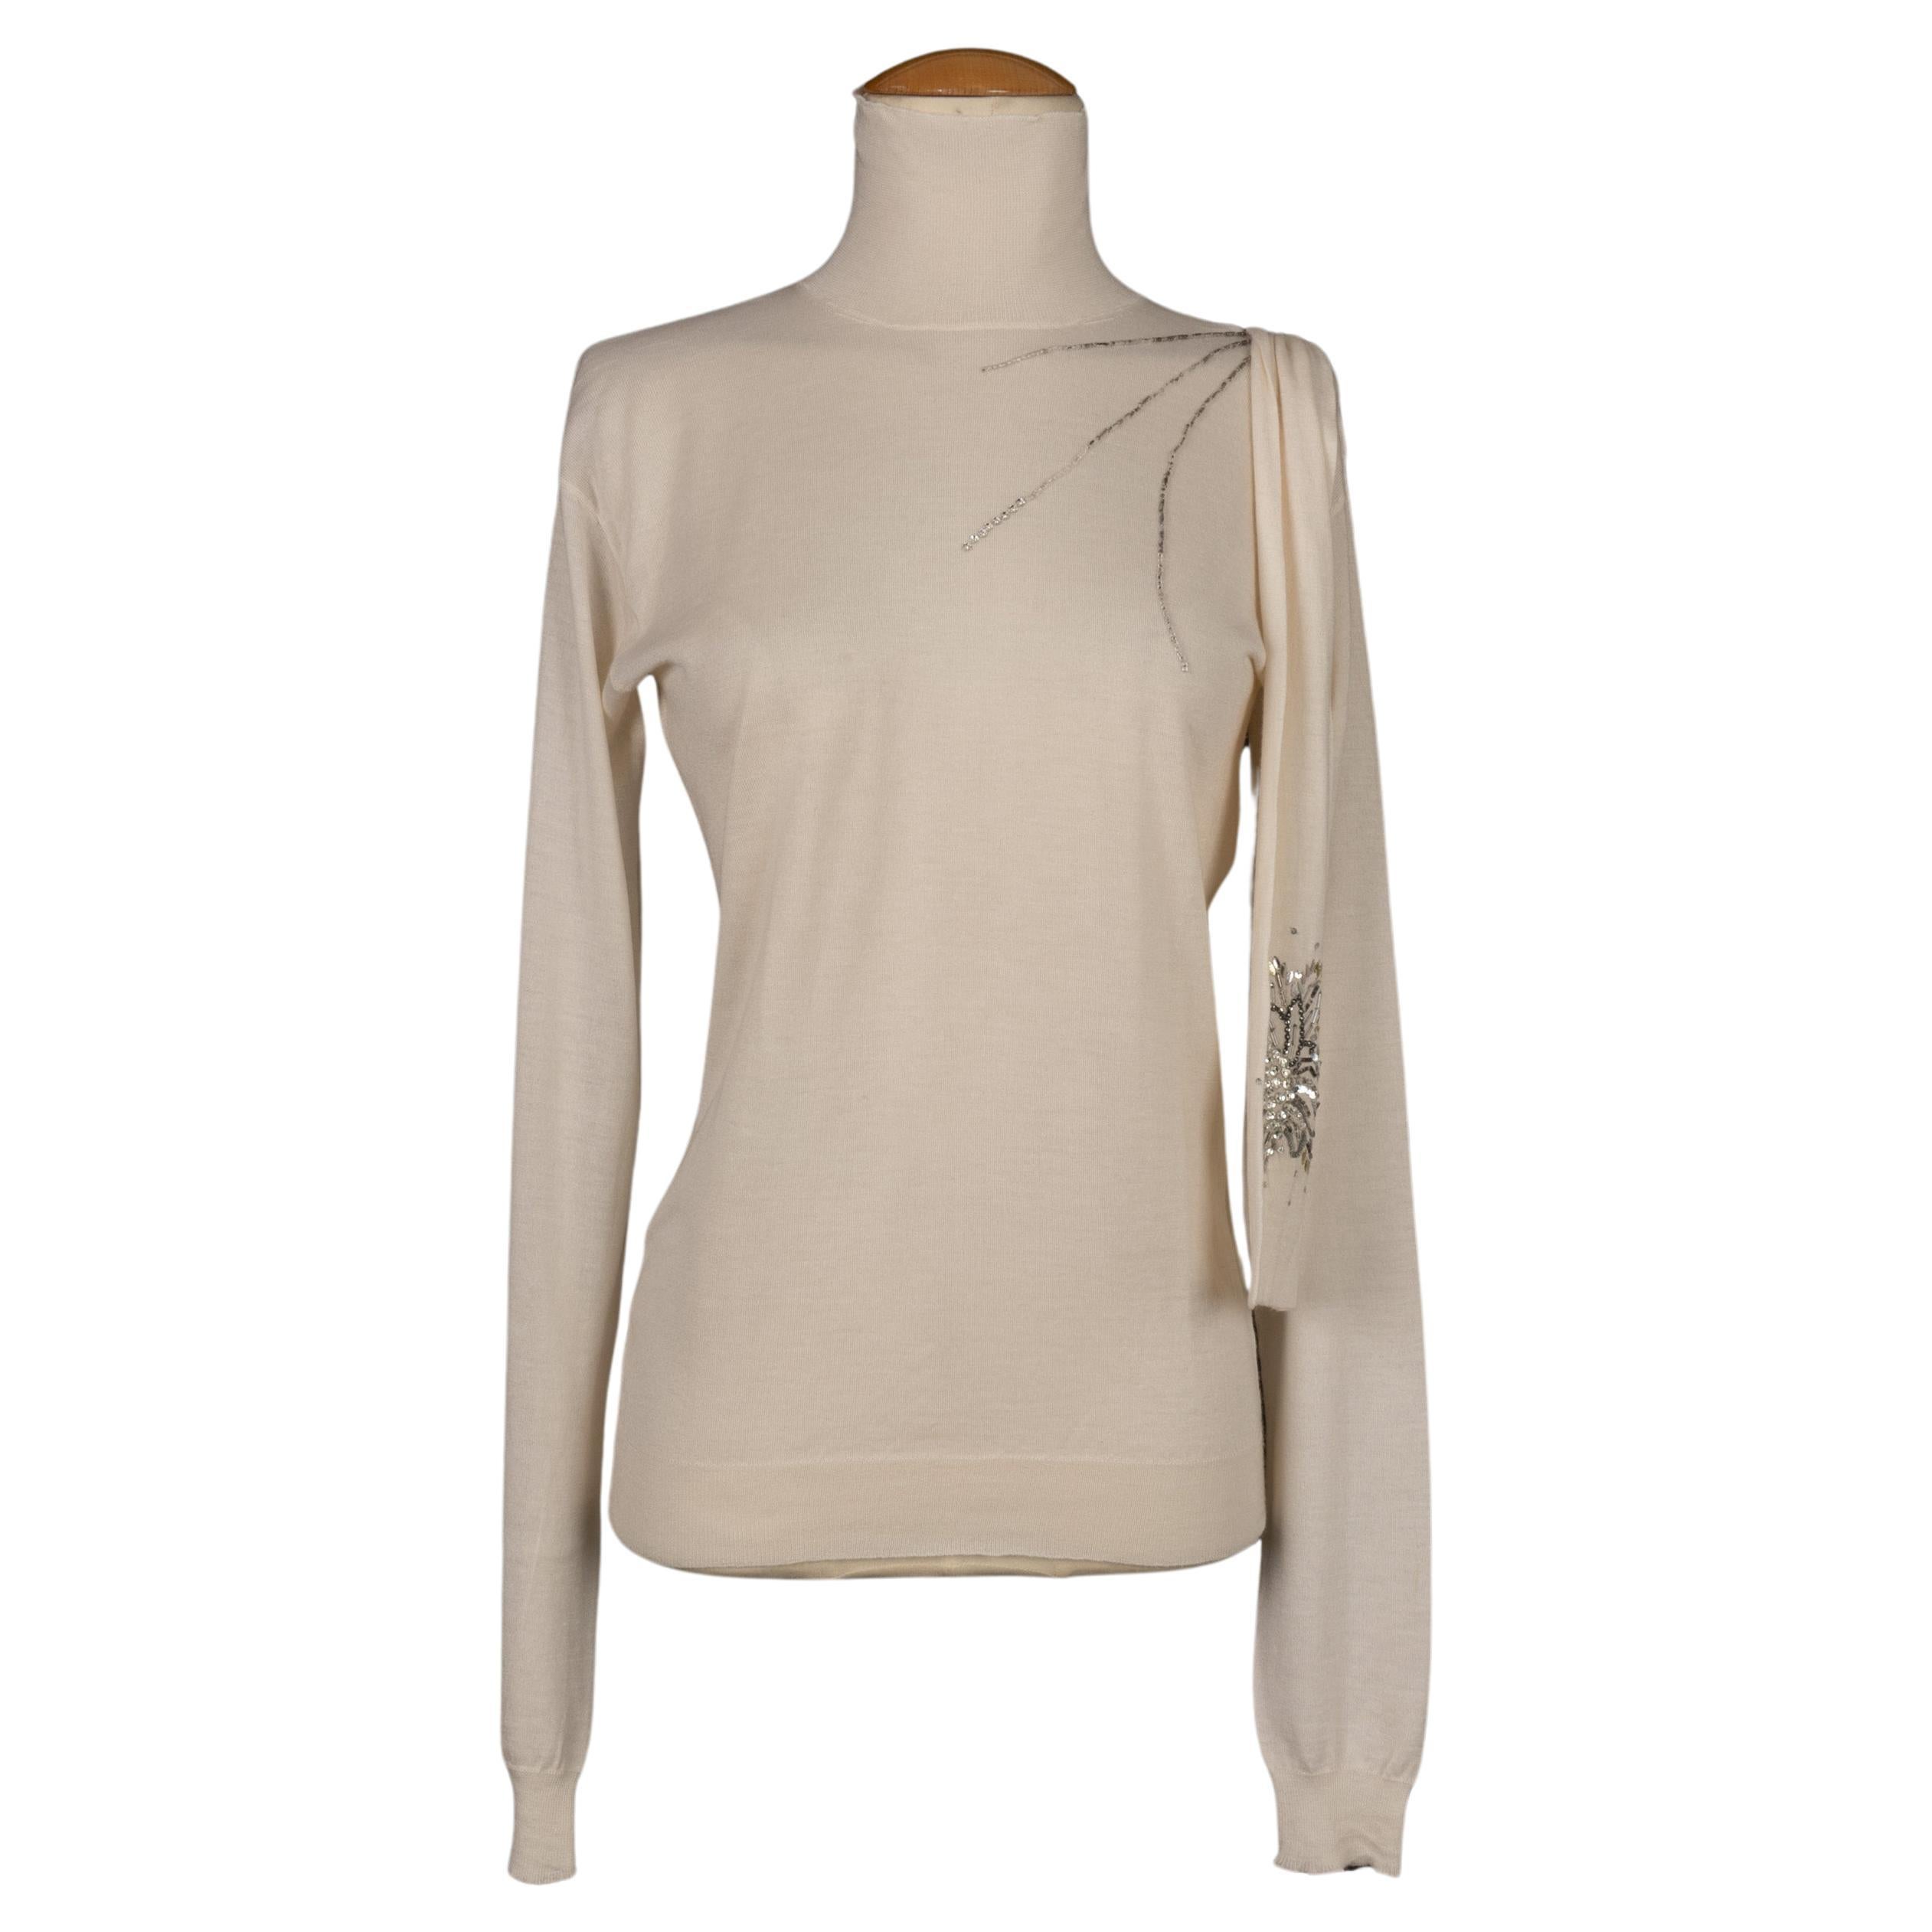 Dior Blended Cashmere Sweater Sewn with Pearls Fall, 2007 For Sale